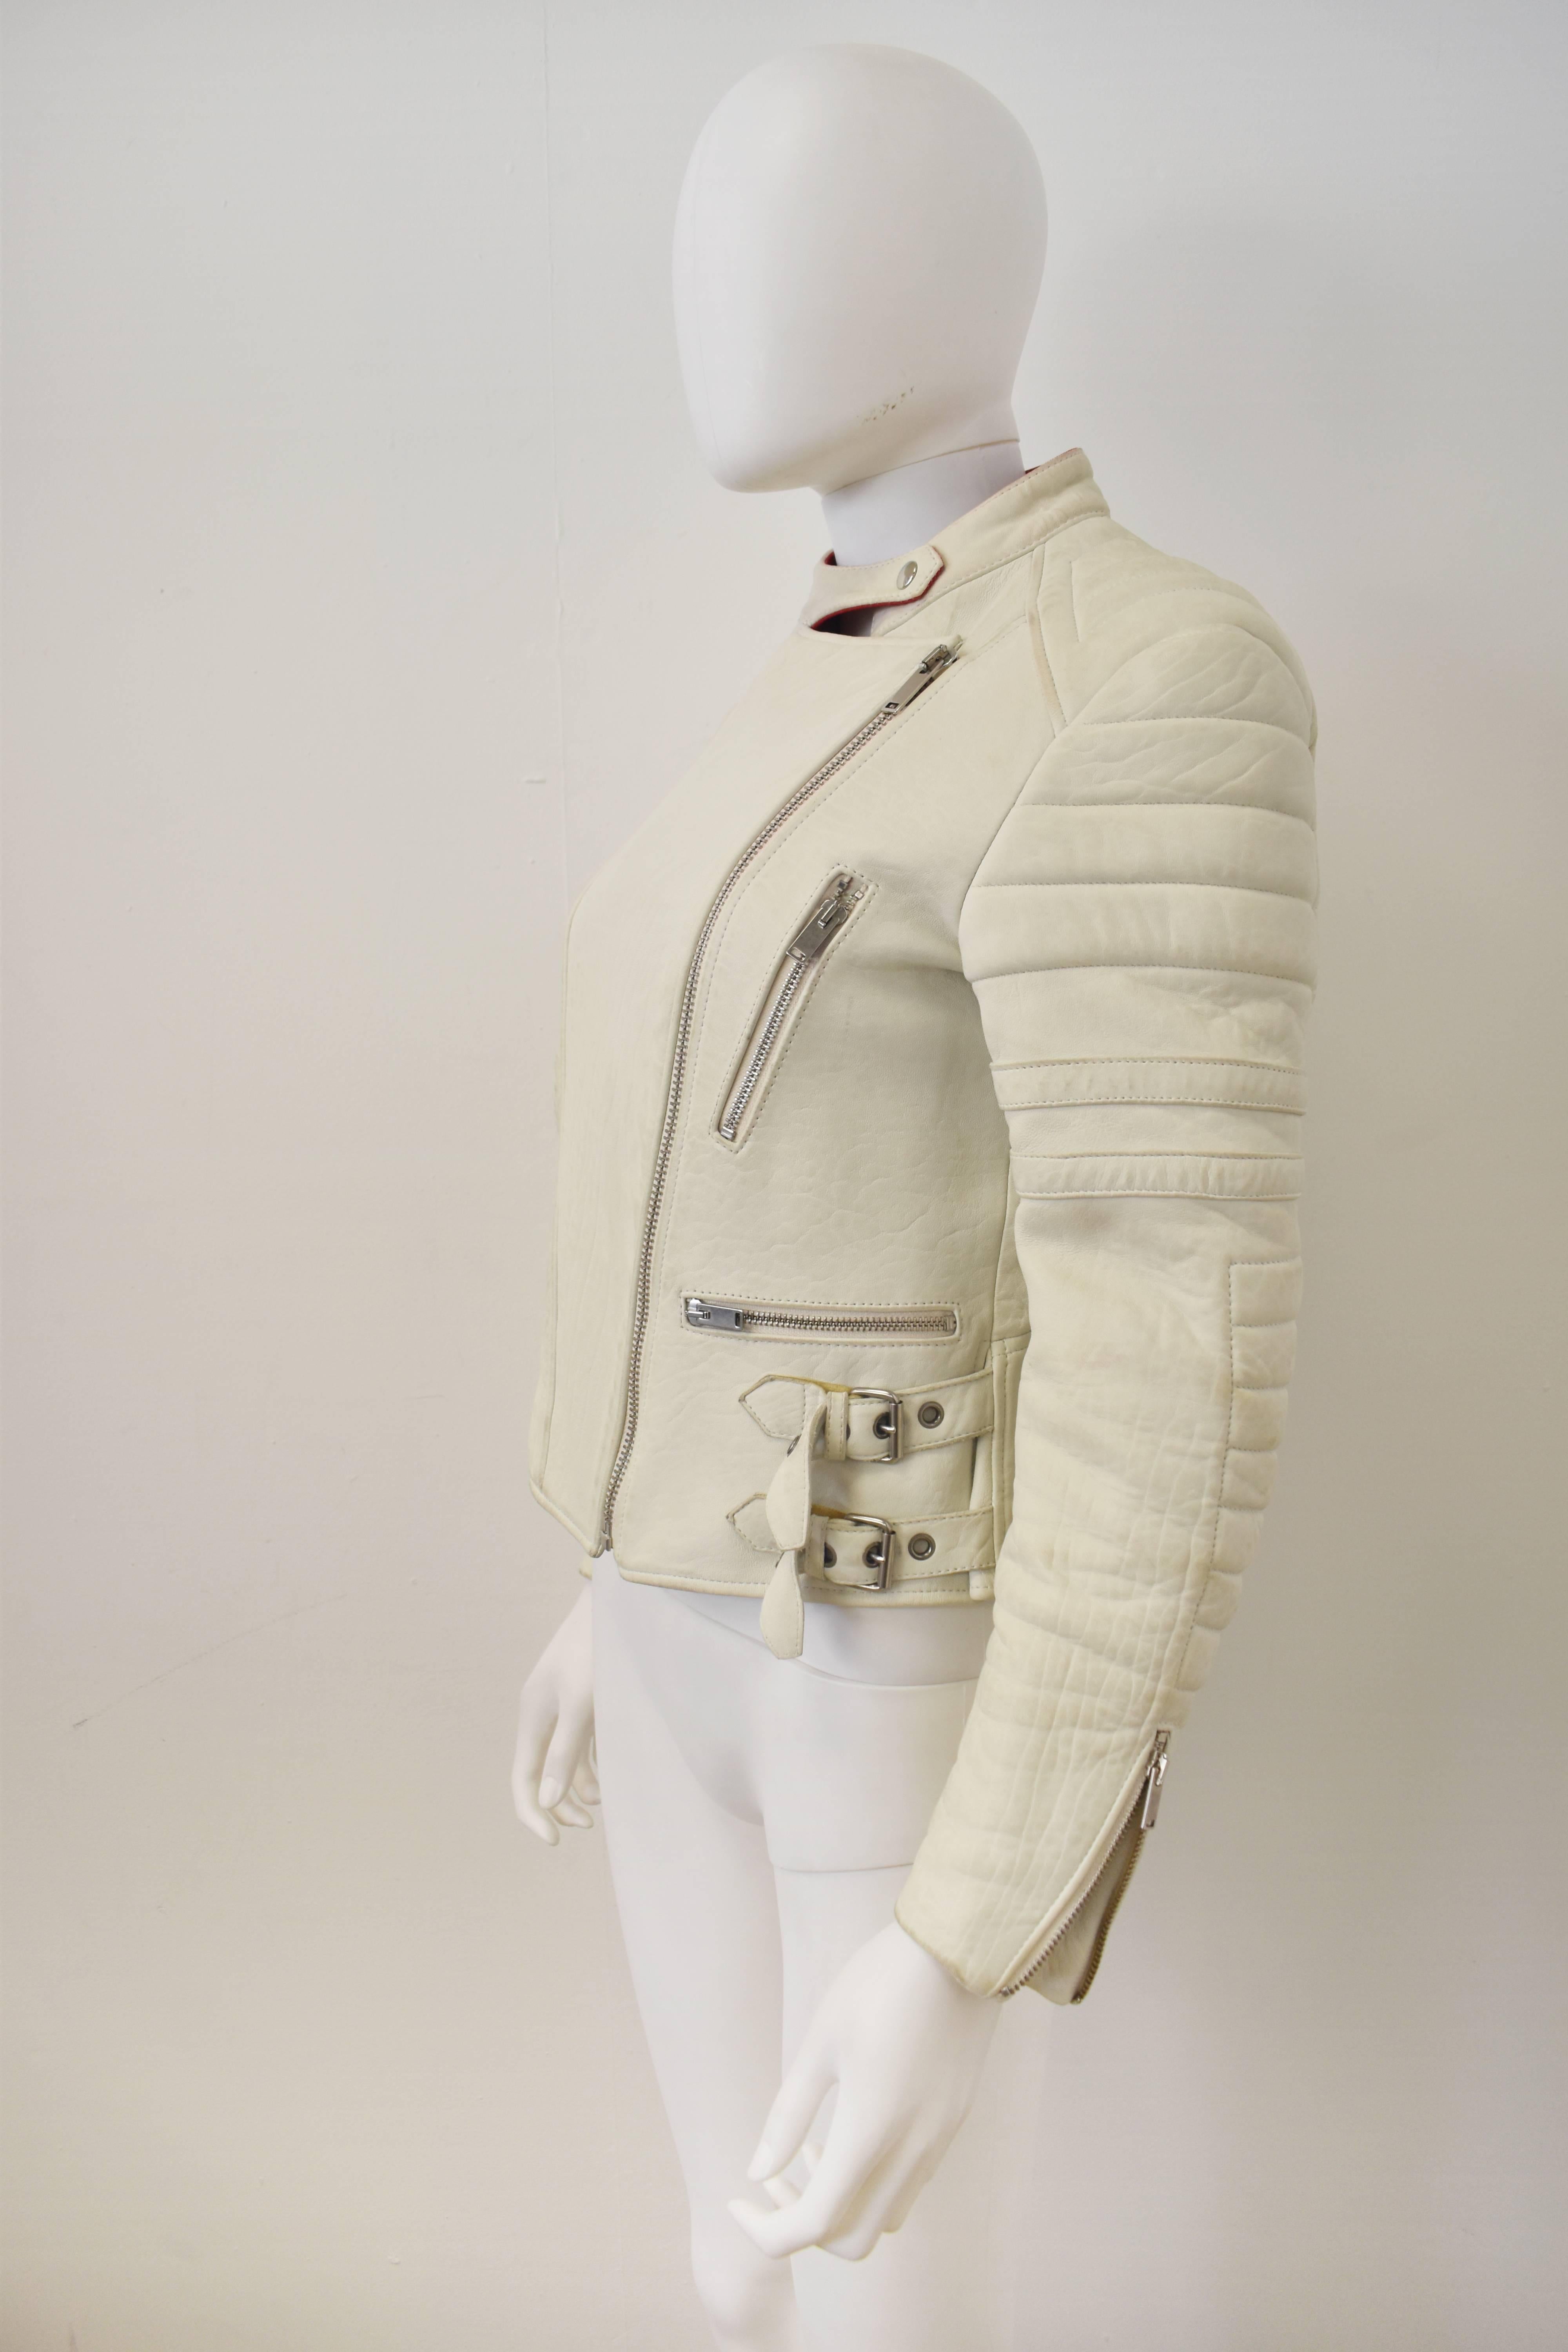 A luxurious cream leather biker jacket from Celine. The jacket bears all the hallmarks of a classic biker jacket with cropped shape, diagonal zip fastening, zip pockets, padded elbows and metal buckle details at the waist. The jacket is made from